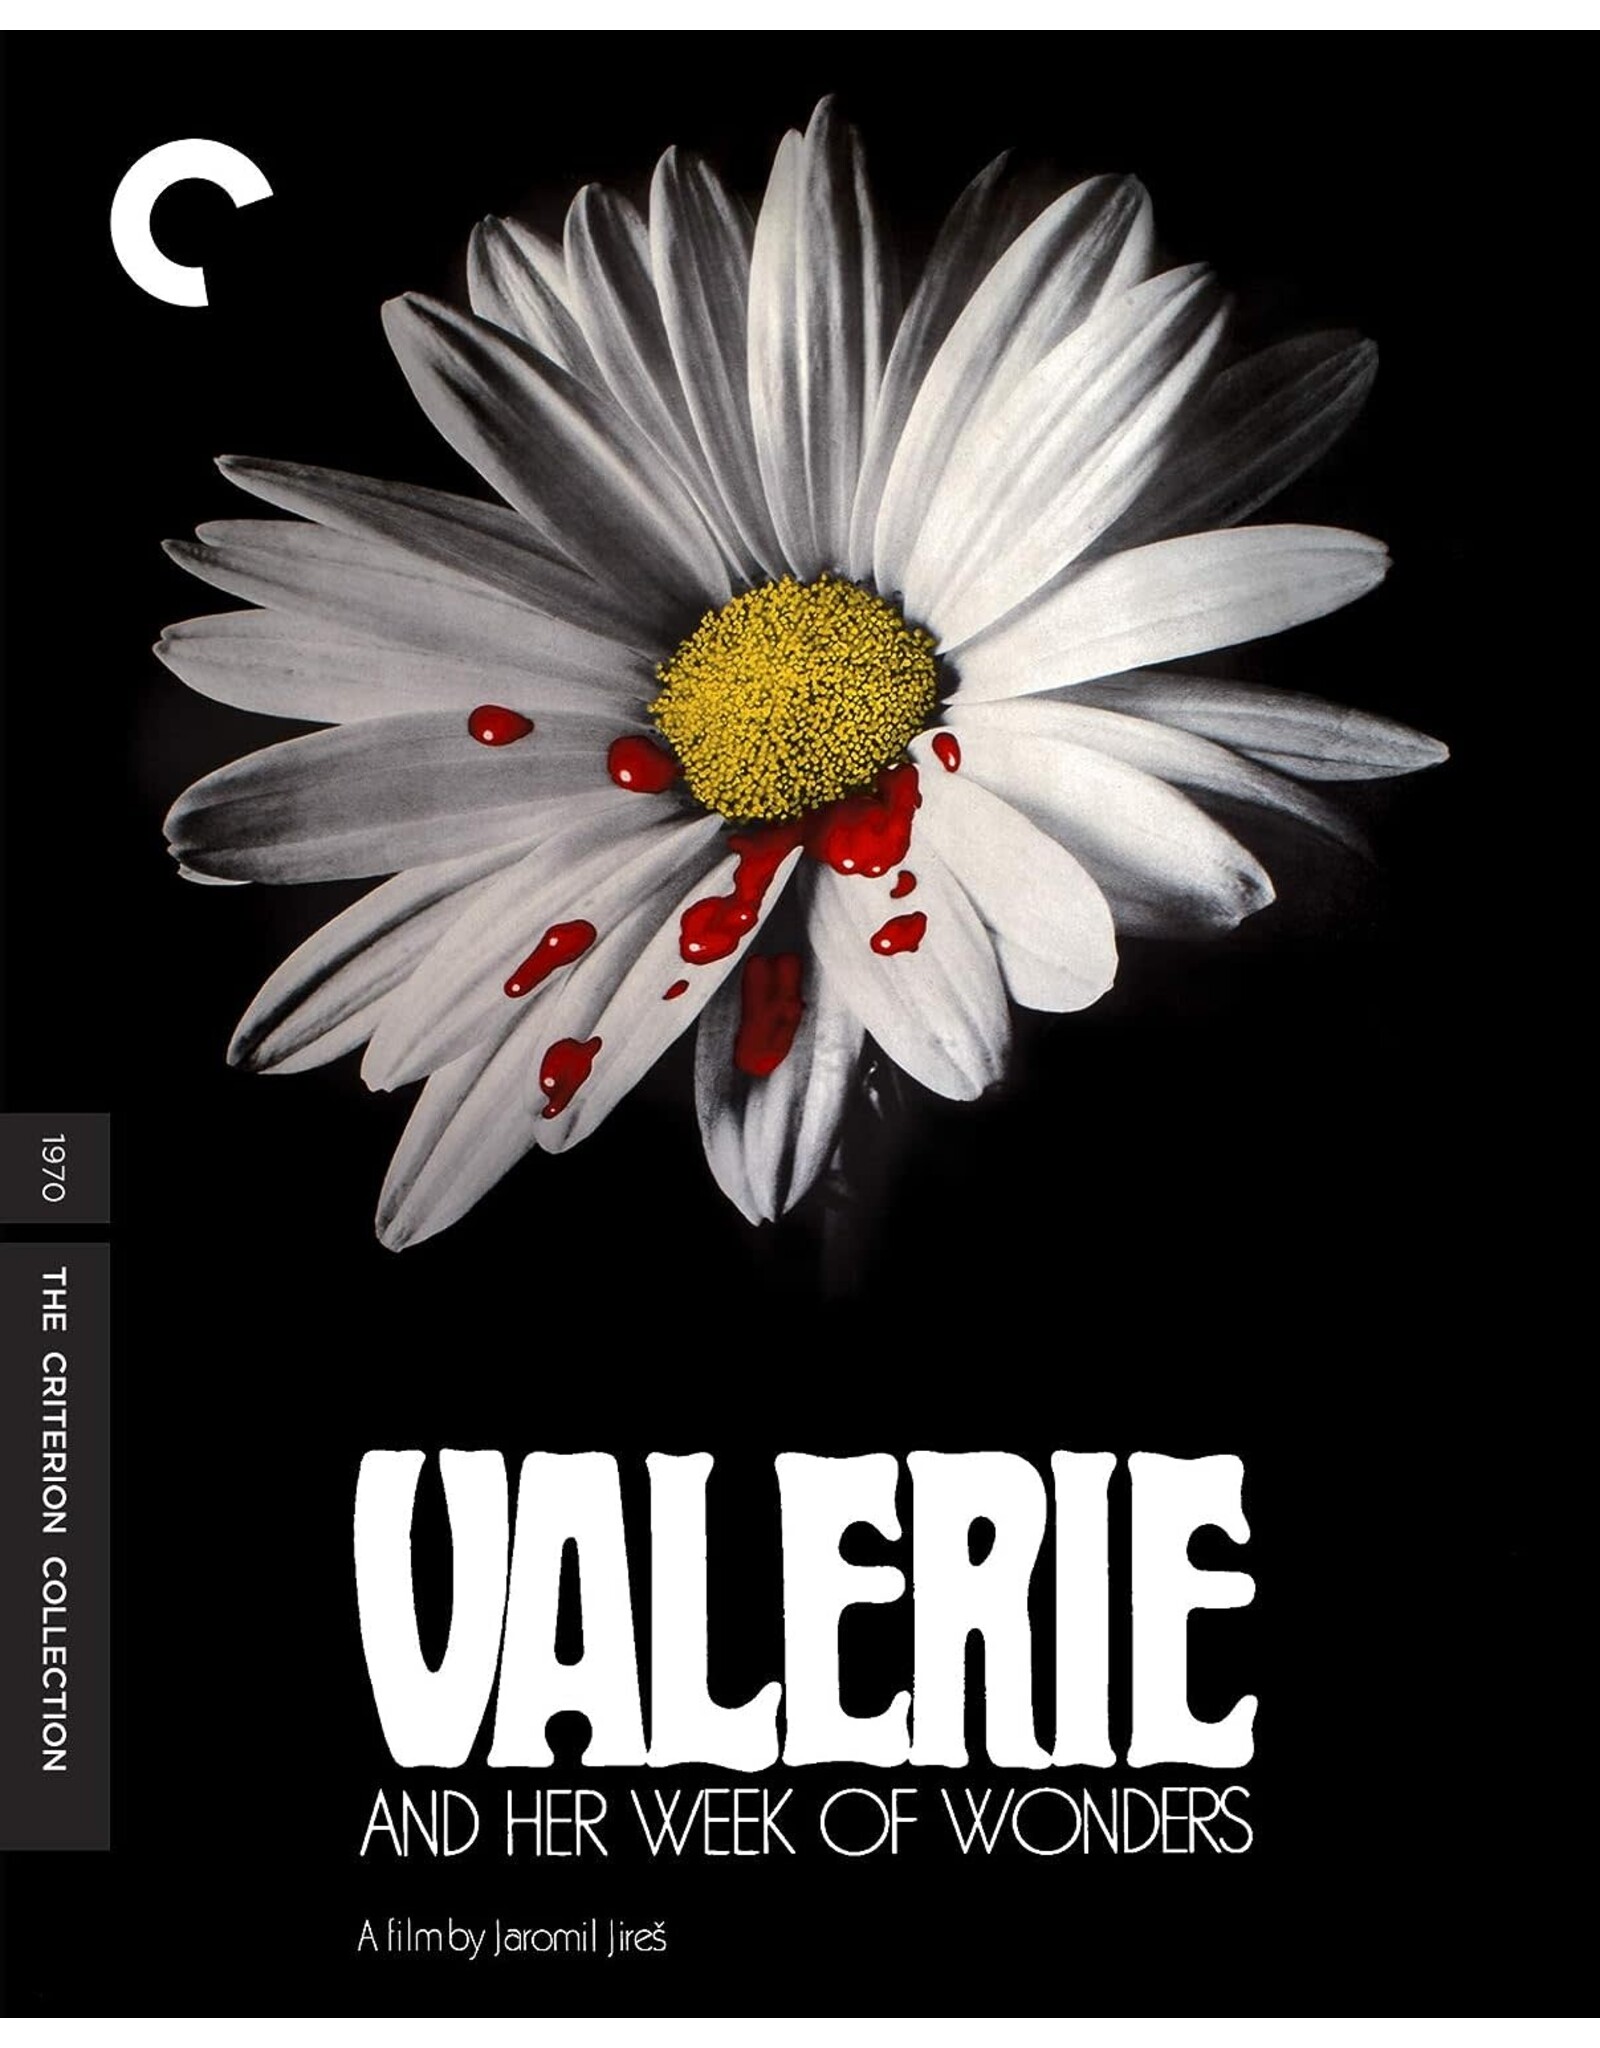 Criterion Collection Valerie and Her Week of Wonders - Criterion Collection (Used)